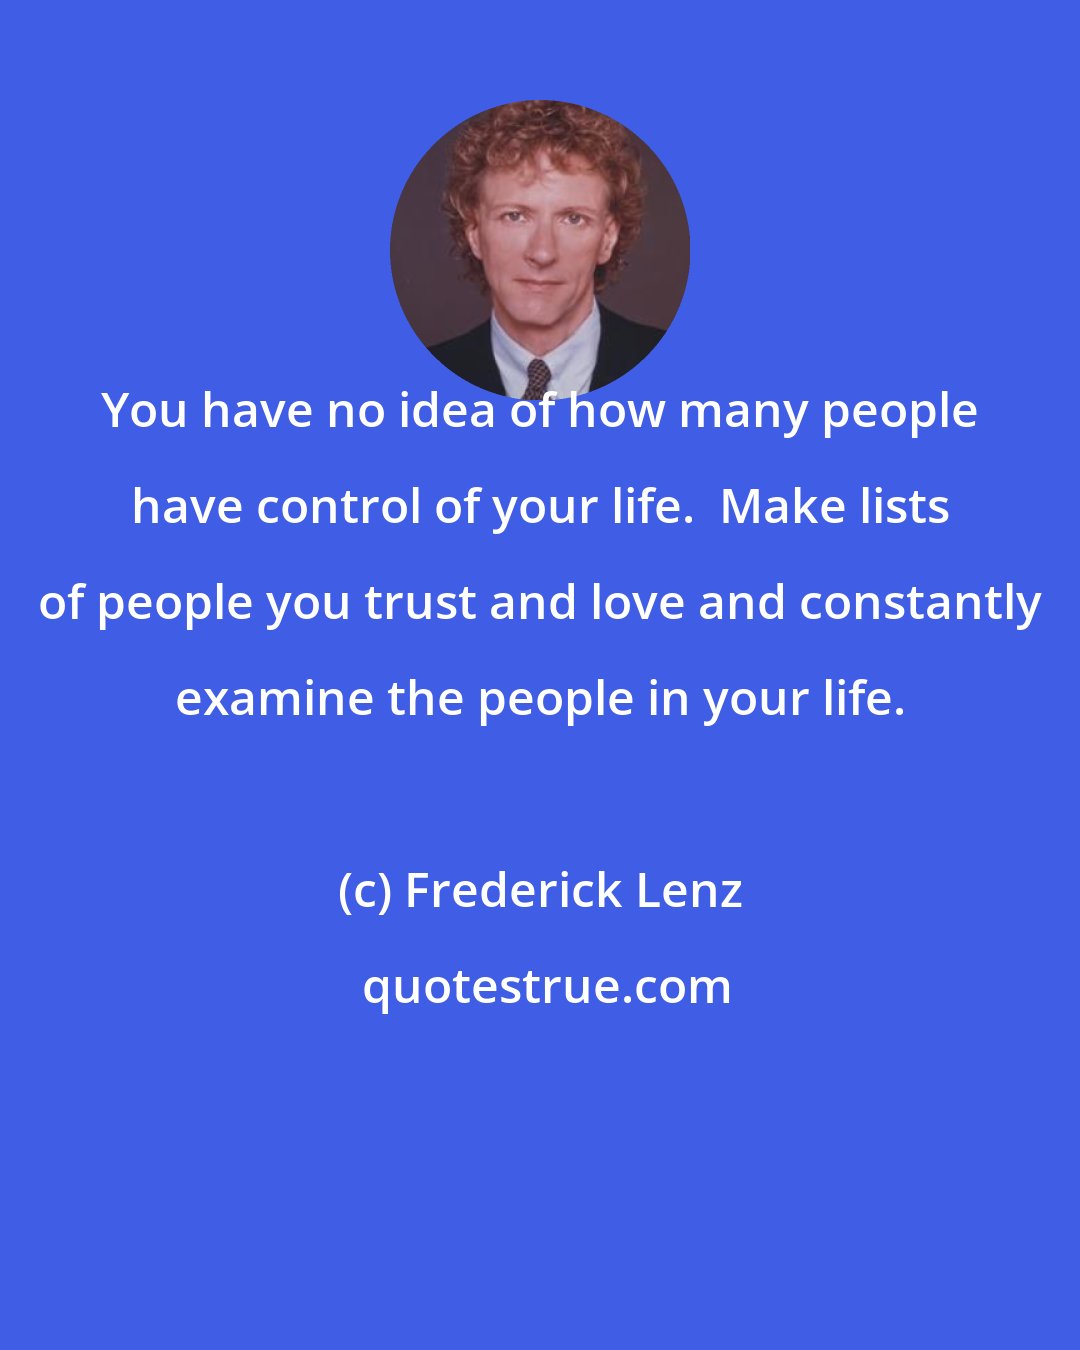 Frederick Lenz: You have no idea of how many people have control of your life.  Make lists of people you trust and love and constantly examine the people in your life.